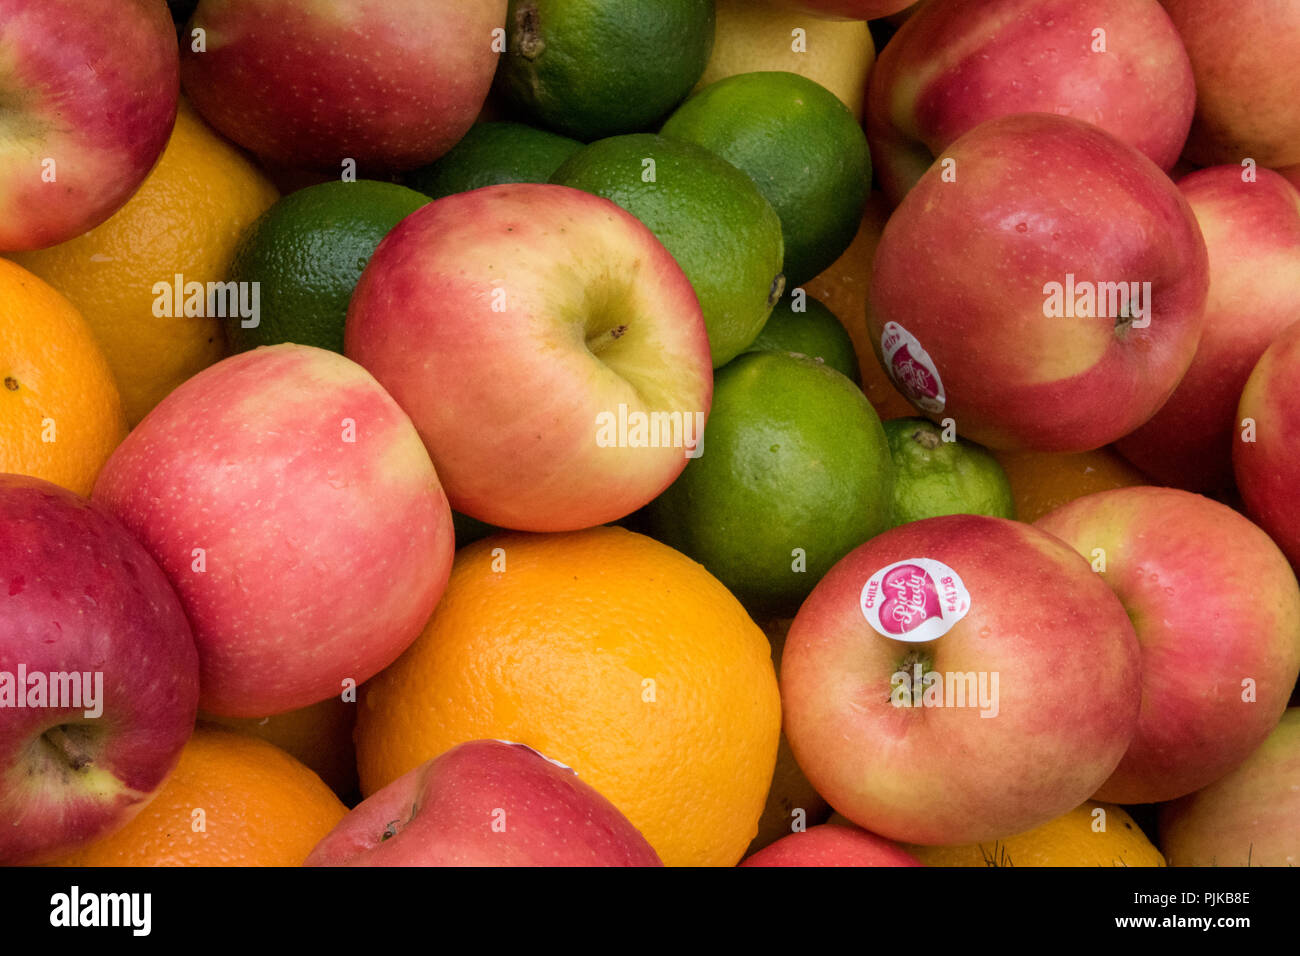 apples, oranges and limes on a fresh fruits and vegetables market stall selling healthy foods. Stock Photo